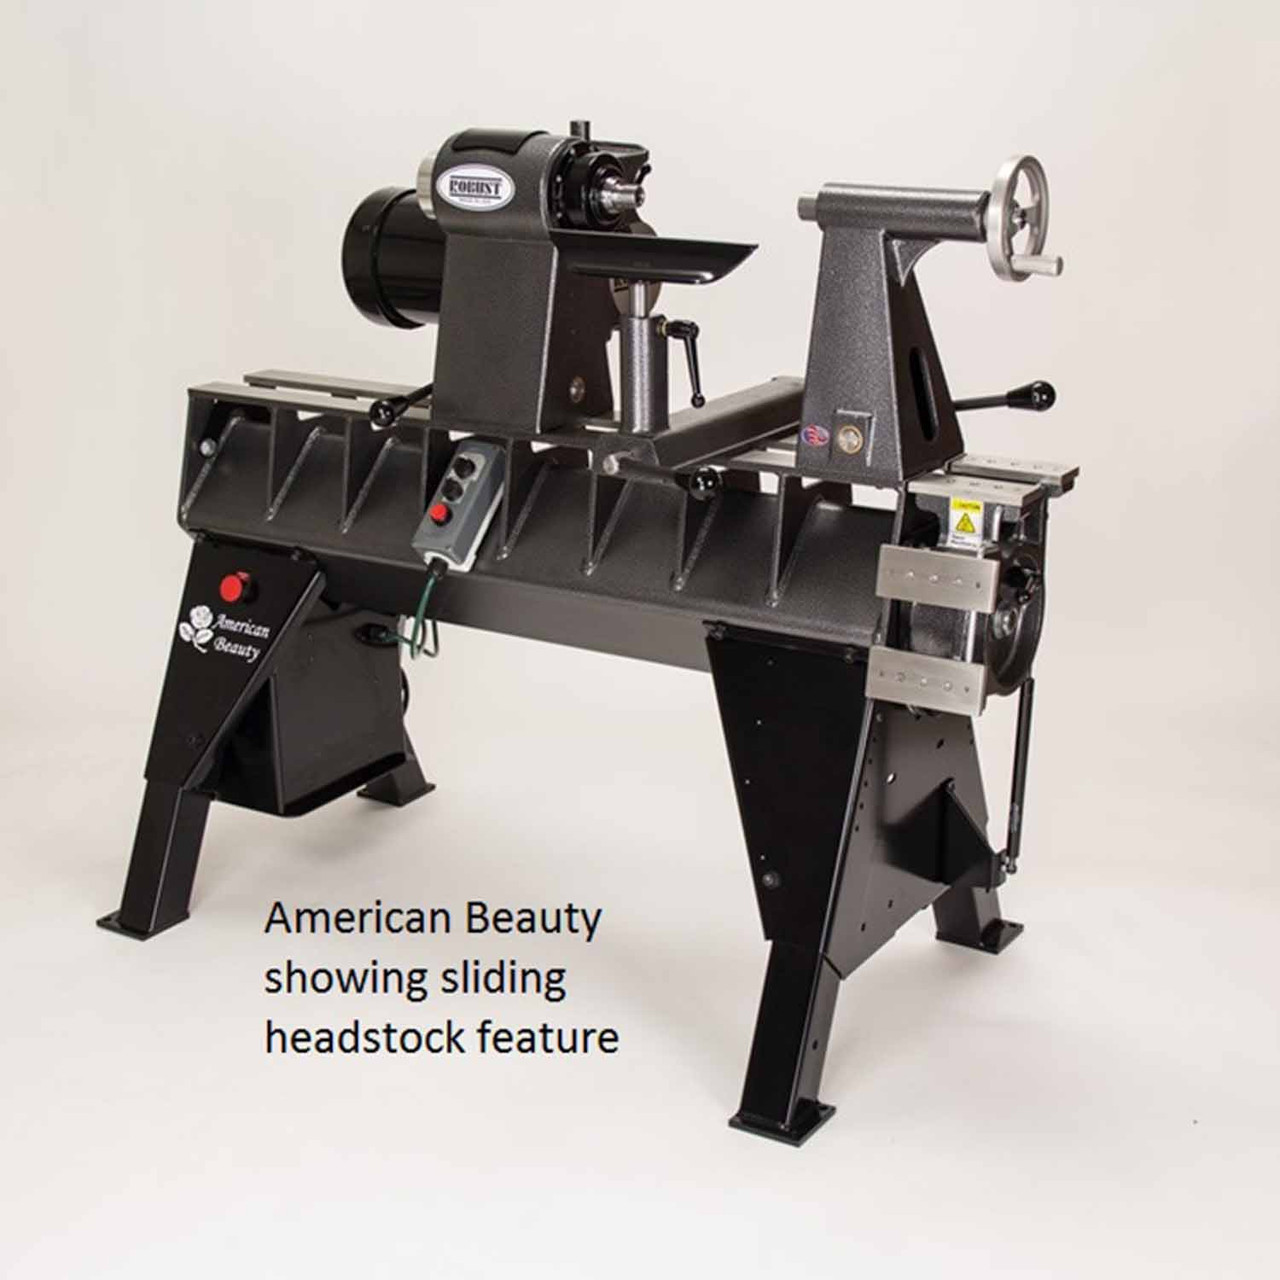 Robust, American Beauty 25" Woodturning Lathe, Standard Bed, 3HP Motor